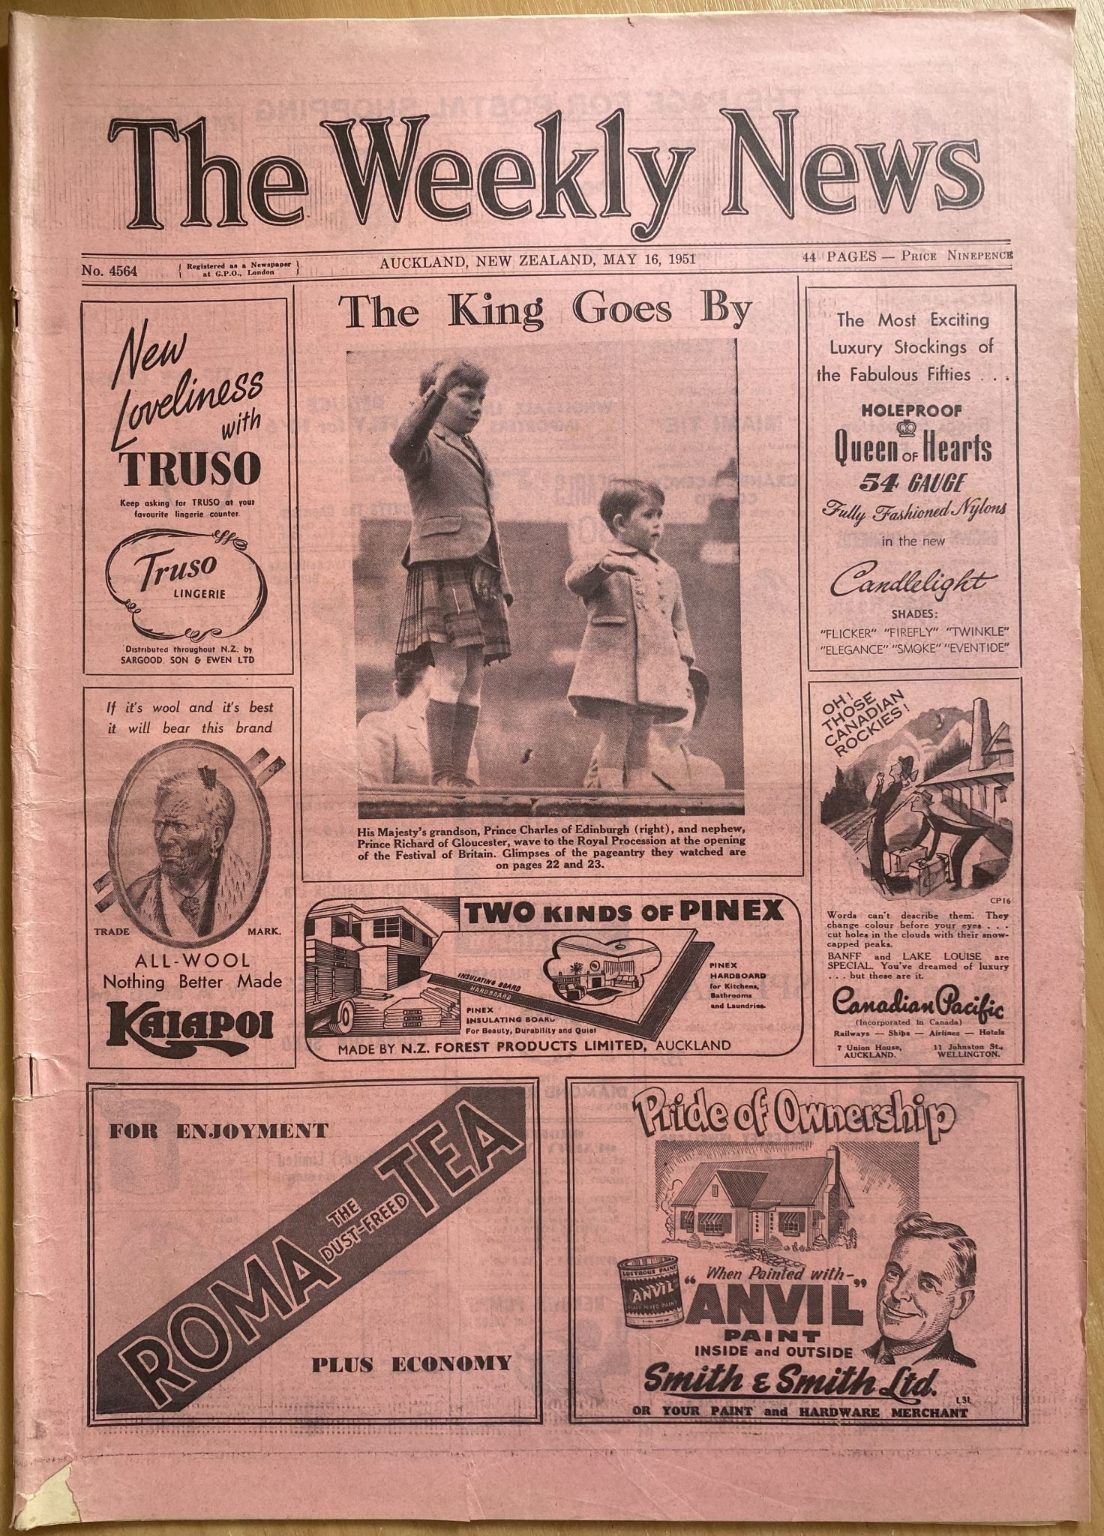 OLD NEWSPAPER: The Weekly News, No. 4564, 16 May 1951